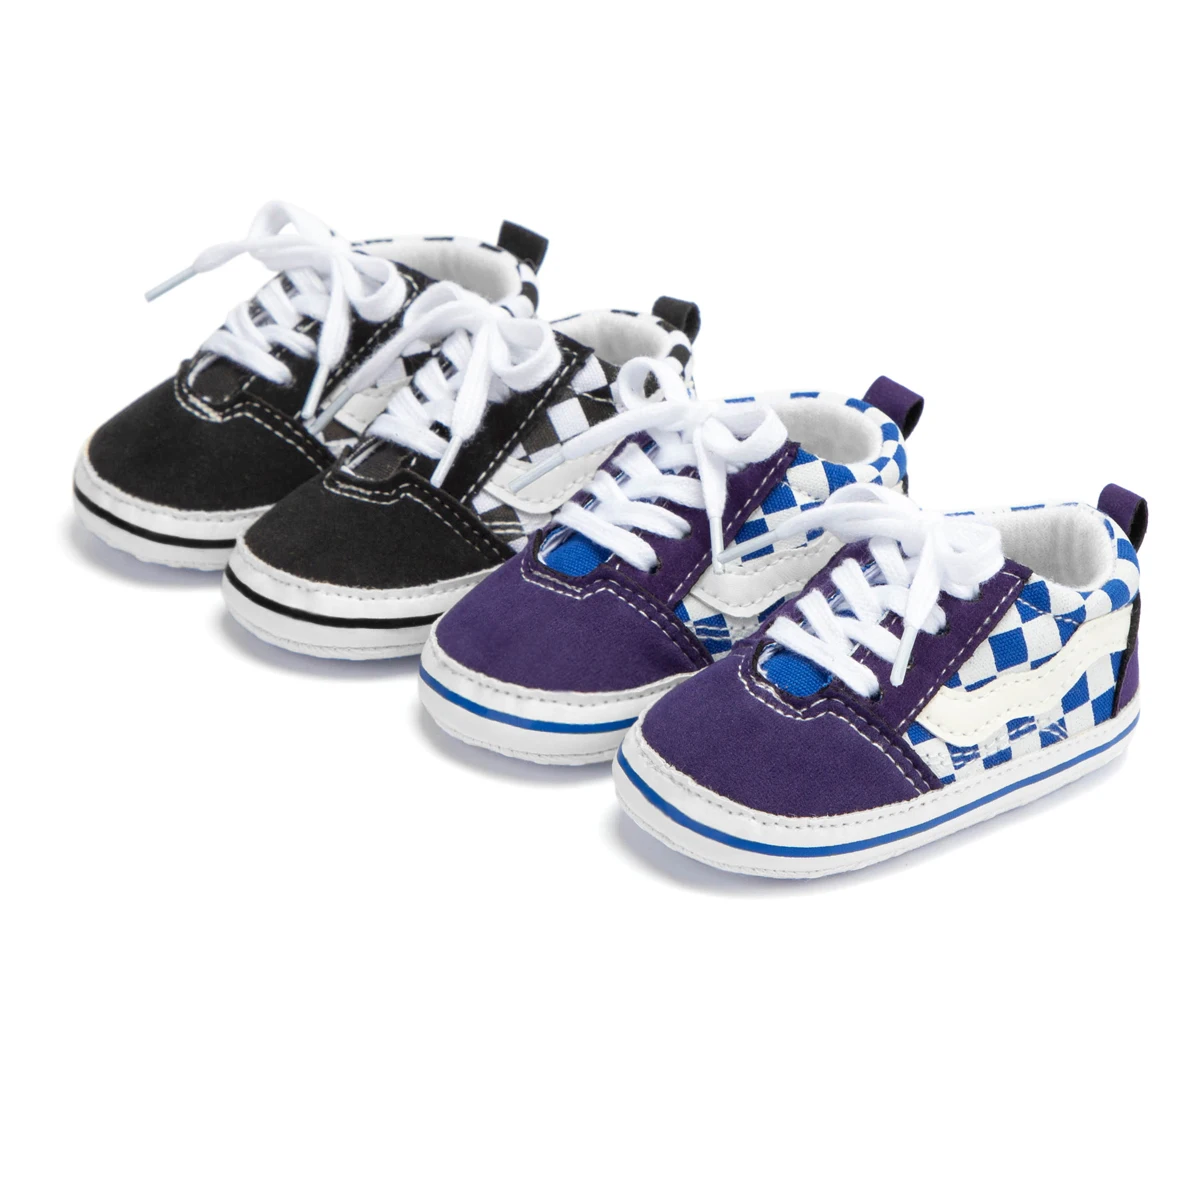 

MOQ 1 New arrival fashional indoor infant babe Walking shoes cotton soft sole Hard-Wearing casual baby shoes